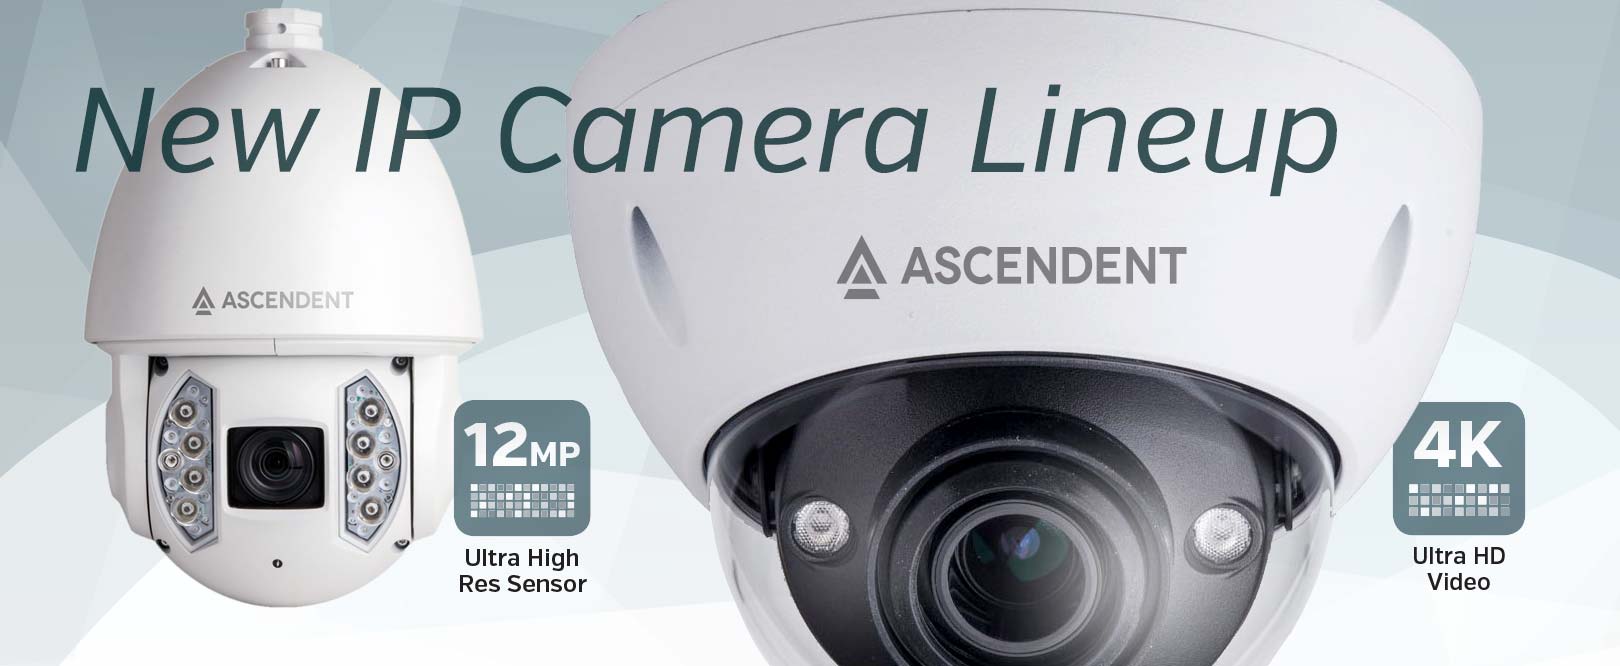 New IP Camera Lineup with 4K & 12MP options